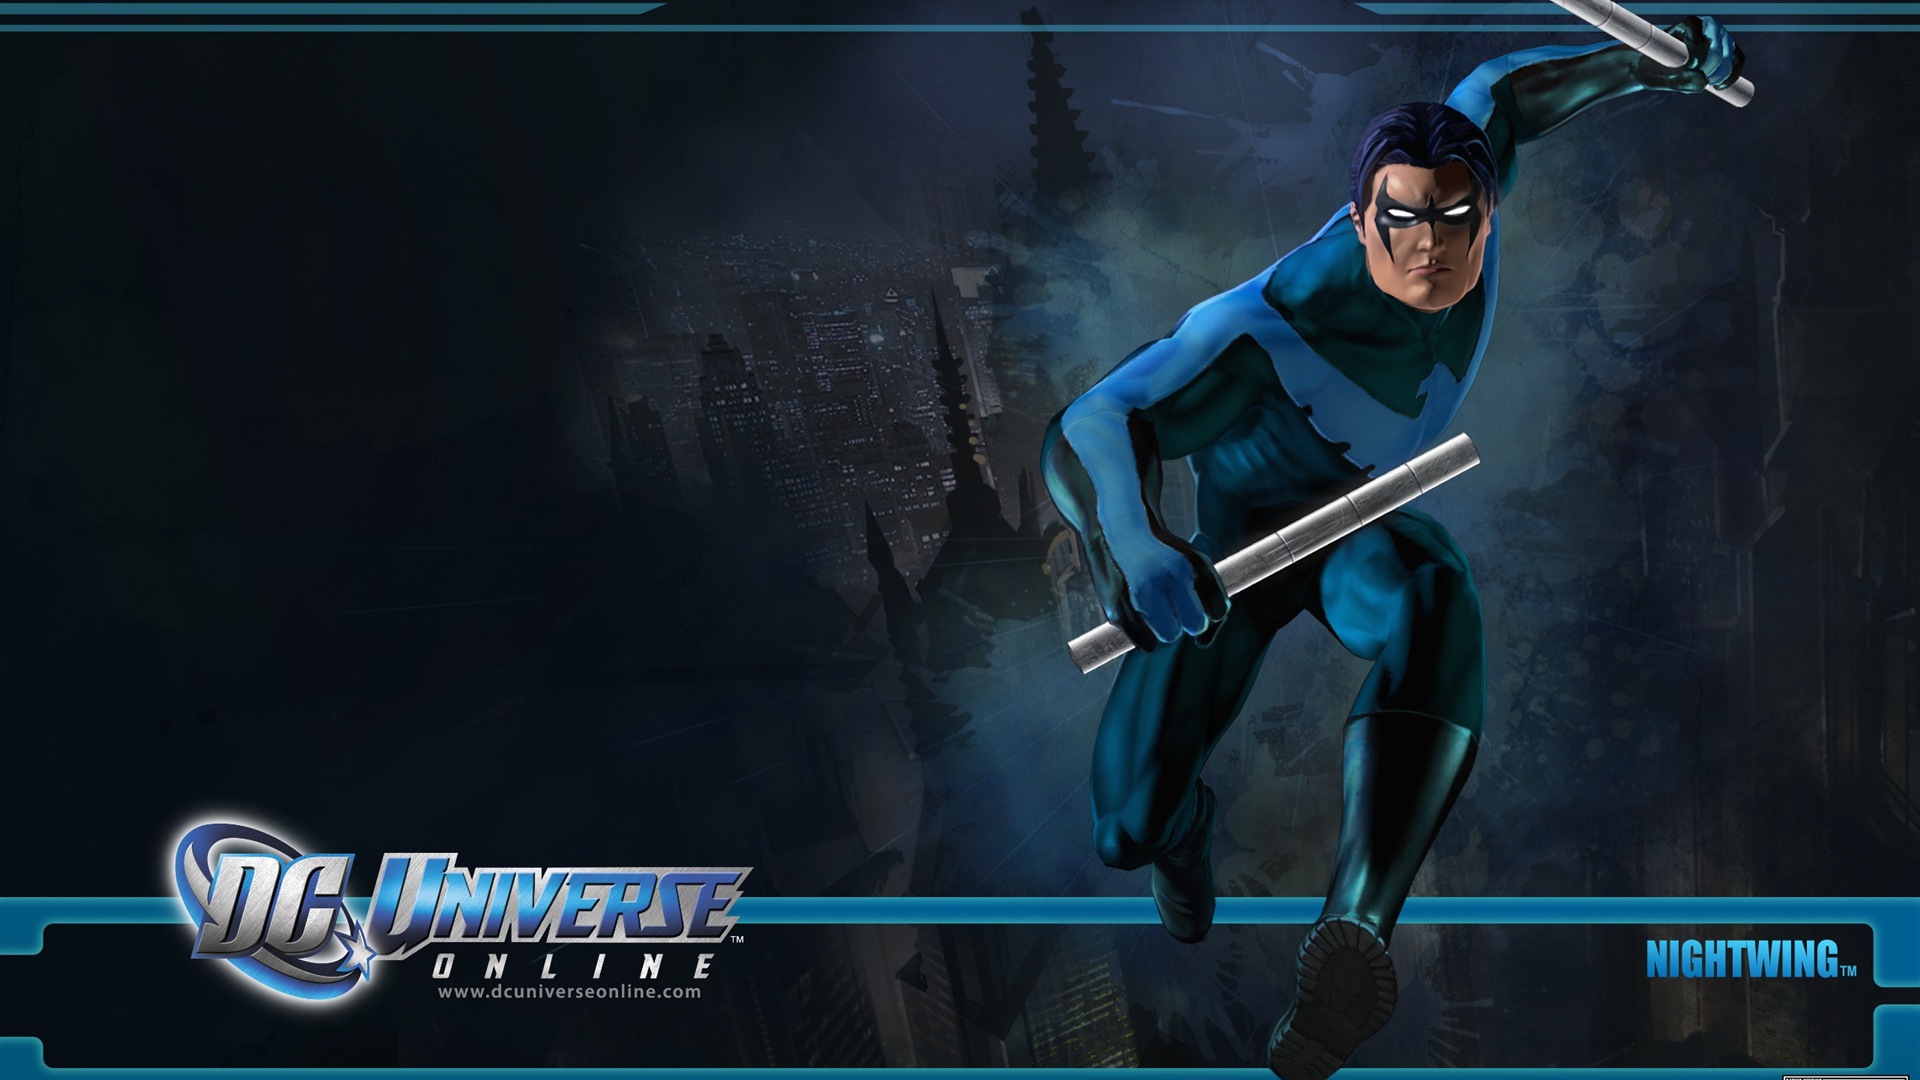 DC Universe Online HD game wallpapers #22 - 1920x1080